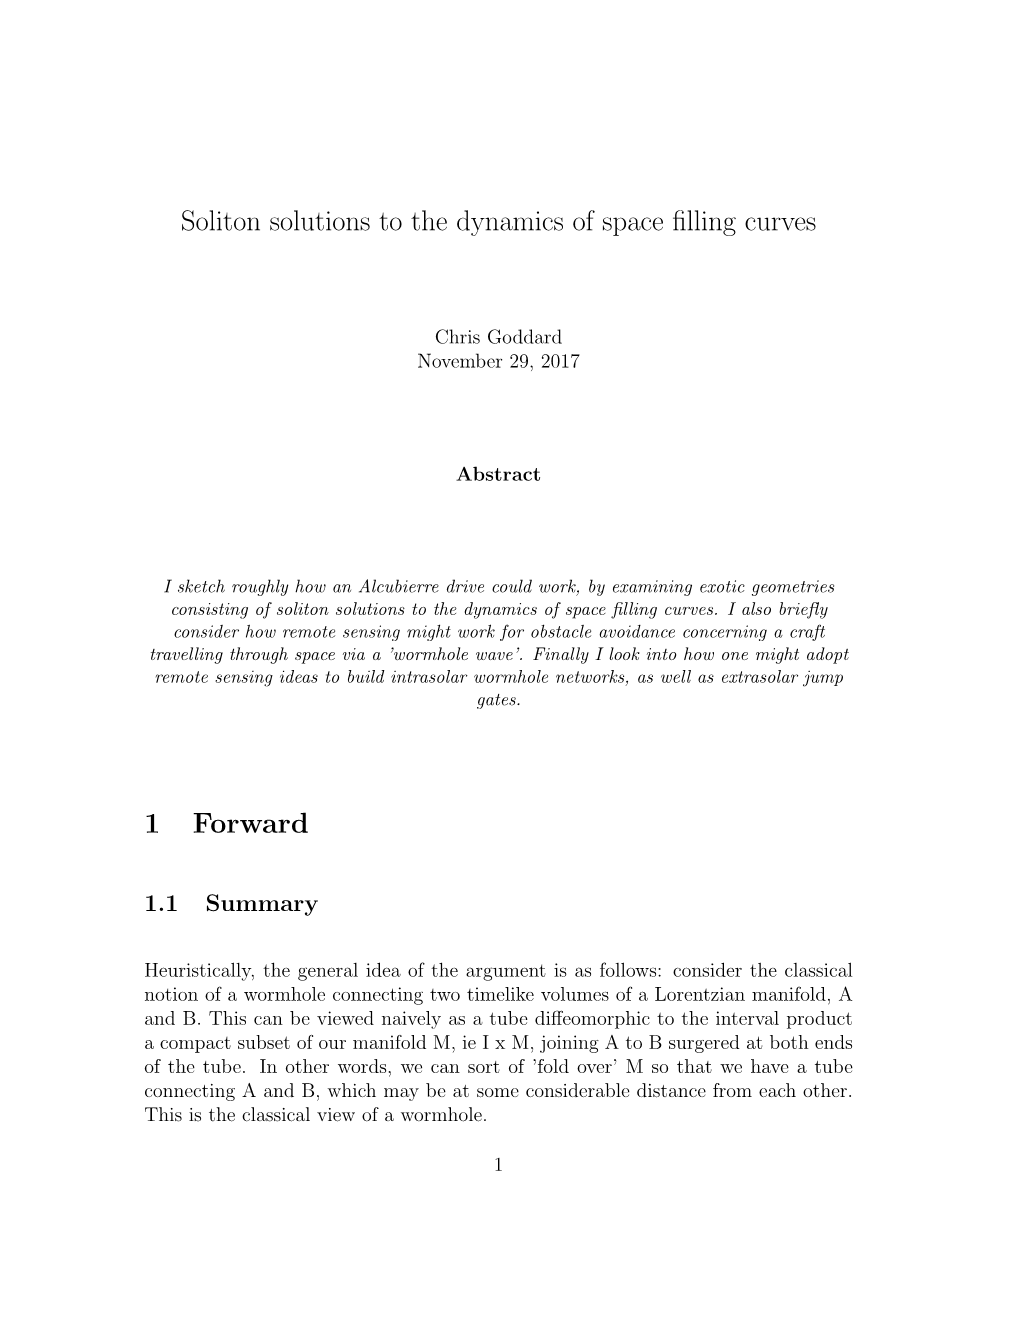 Soliton Solutions to the Dynamics of Space Filling Curves 1 Forward